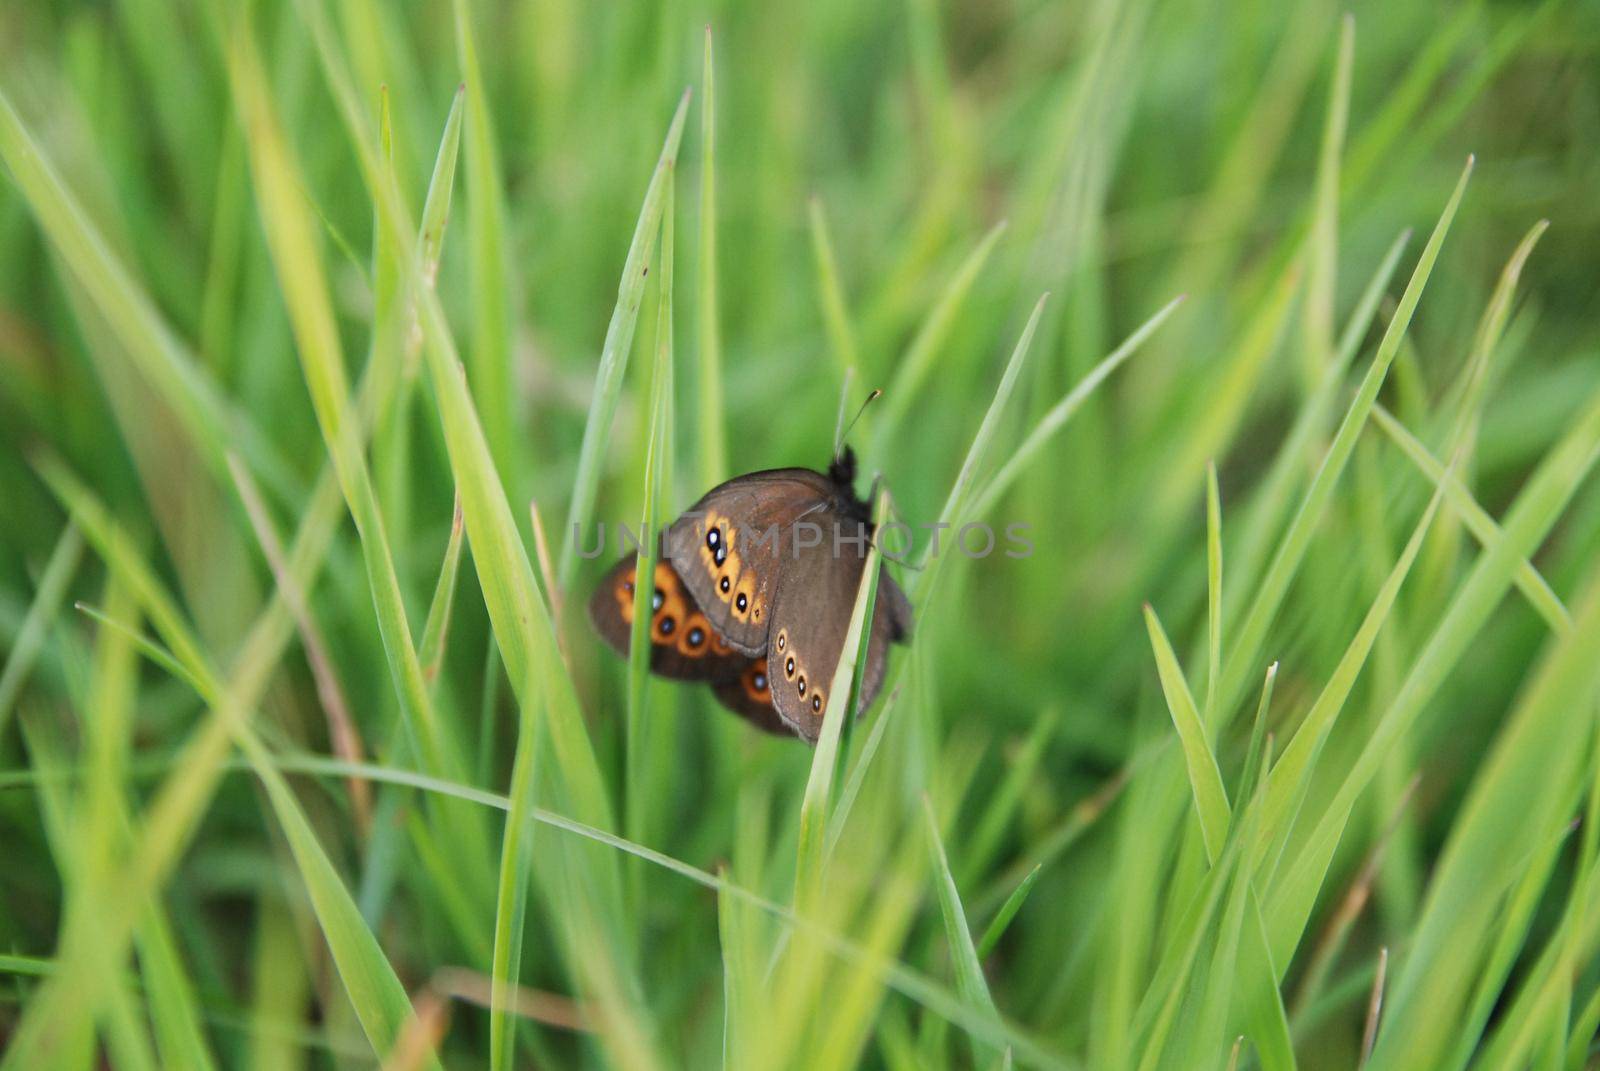 butterfly in gras   (NIKON D80; 2.6.2007; 1/200 at f/2.8; ISO 500; white balance: Auto; focal length: 50 mm)